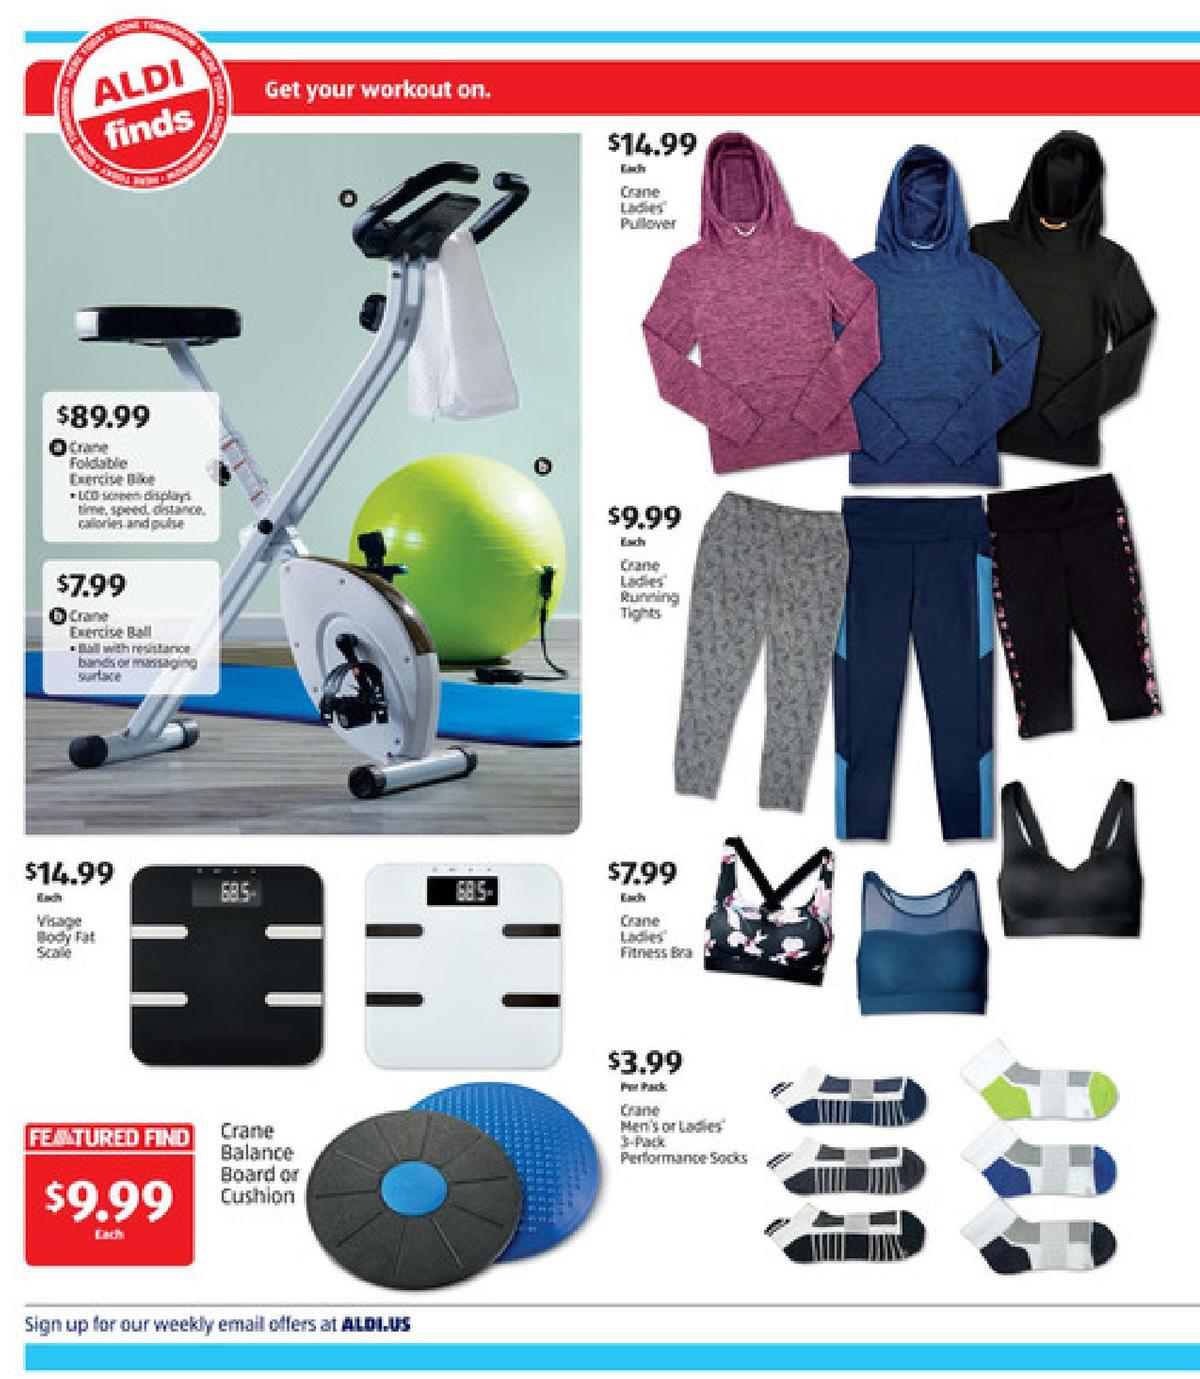 ALDI In Store Ad Weekly Ad from December 29